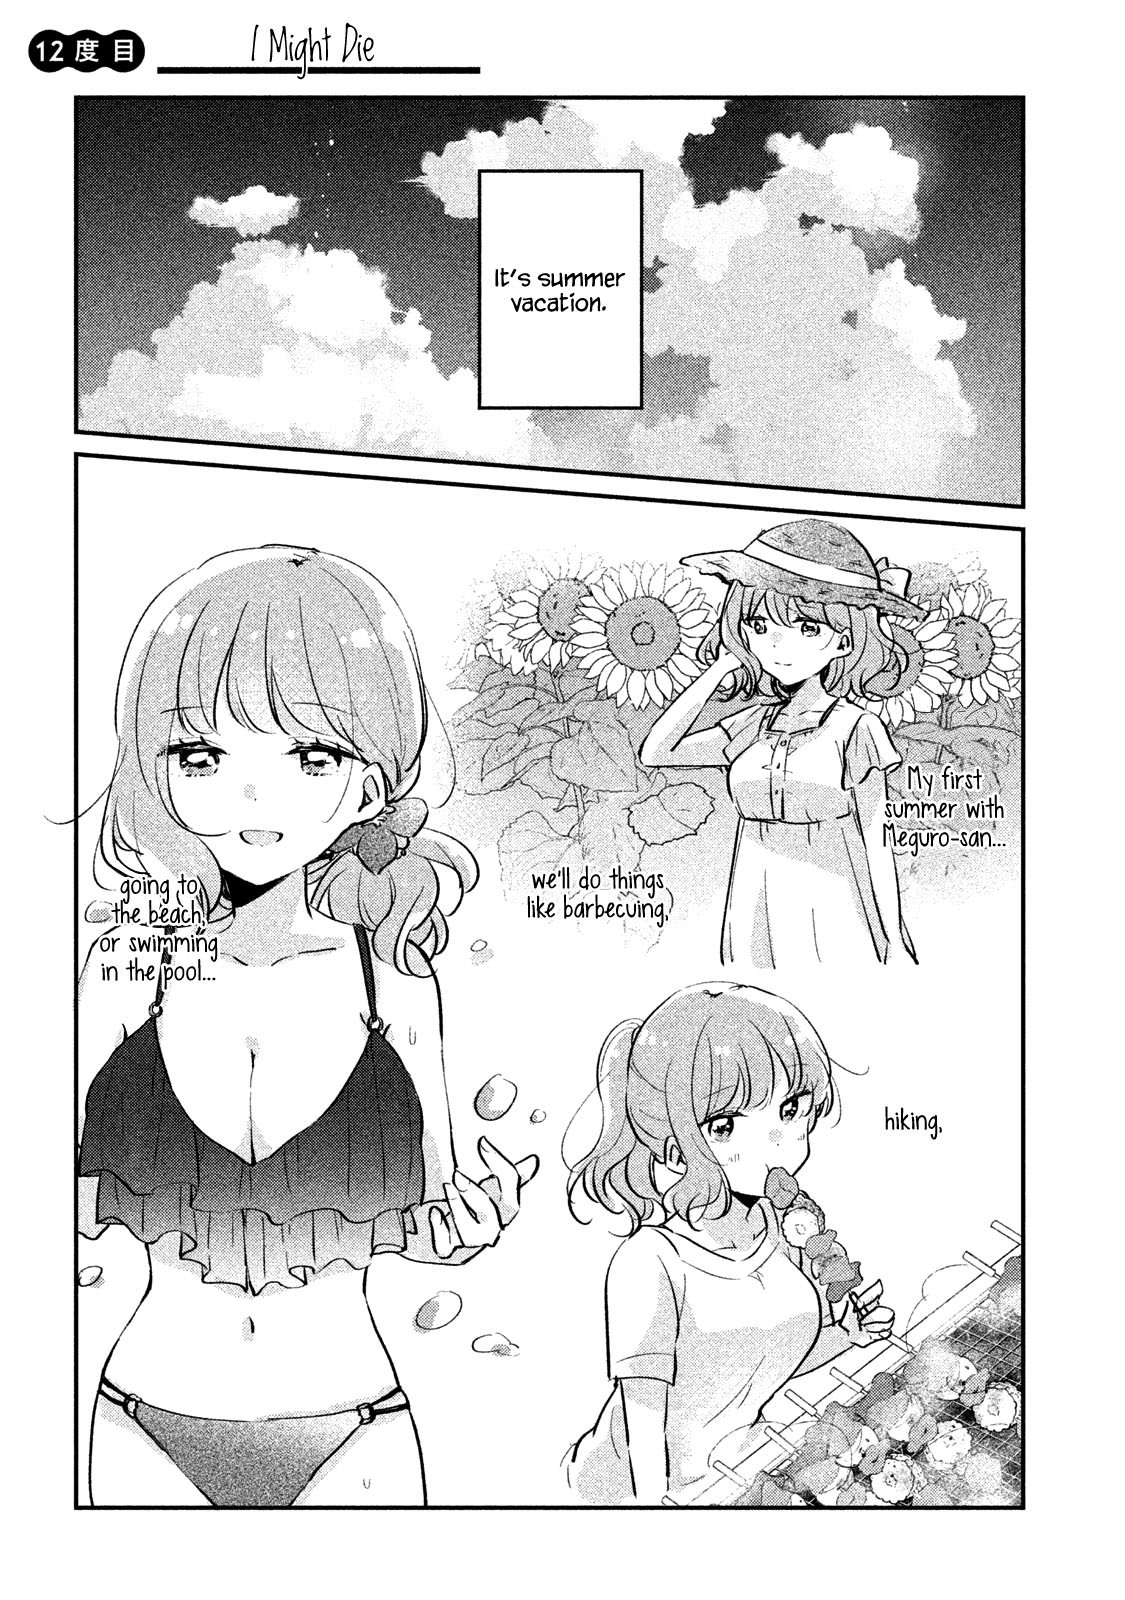 It's Not Meguro-san's First Time chapter 12 page 1